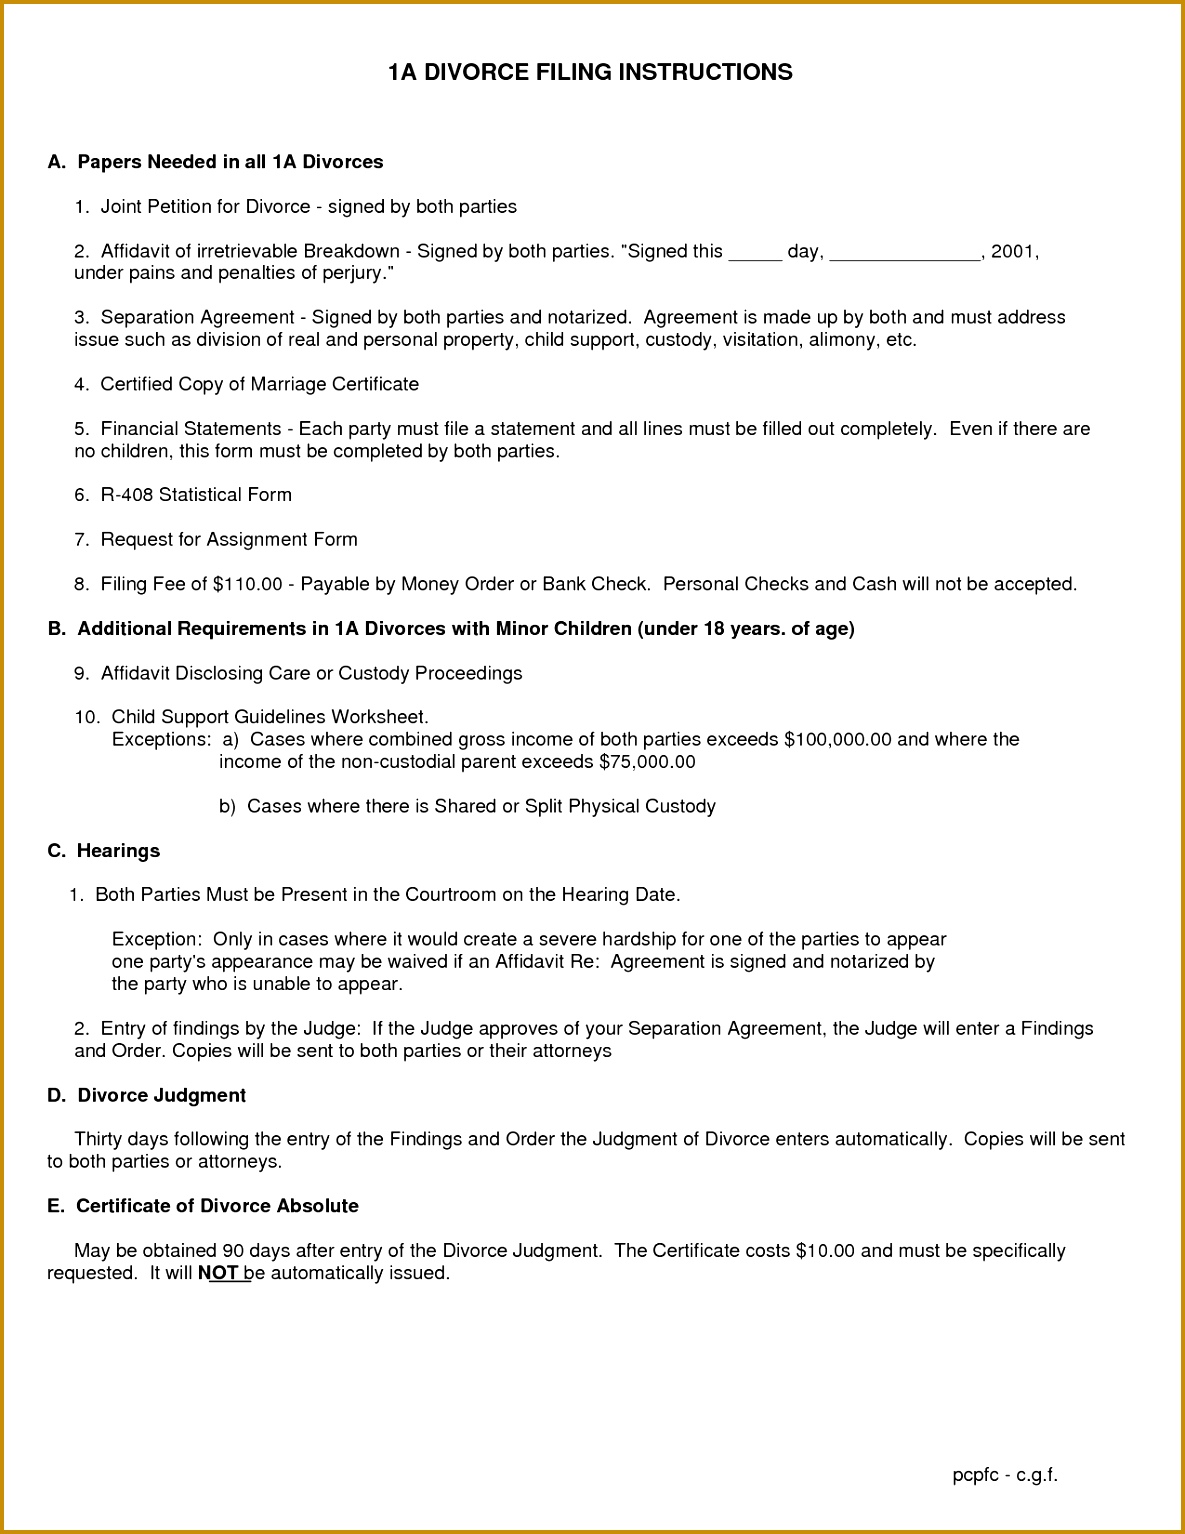 Separation Agreement tario Template by Separation Agreement Sample Massachusetts Best Resumes Curiculum 15341185